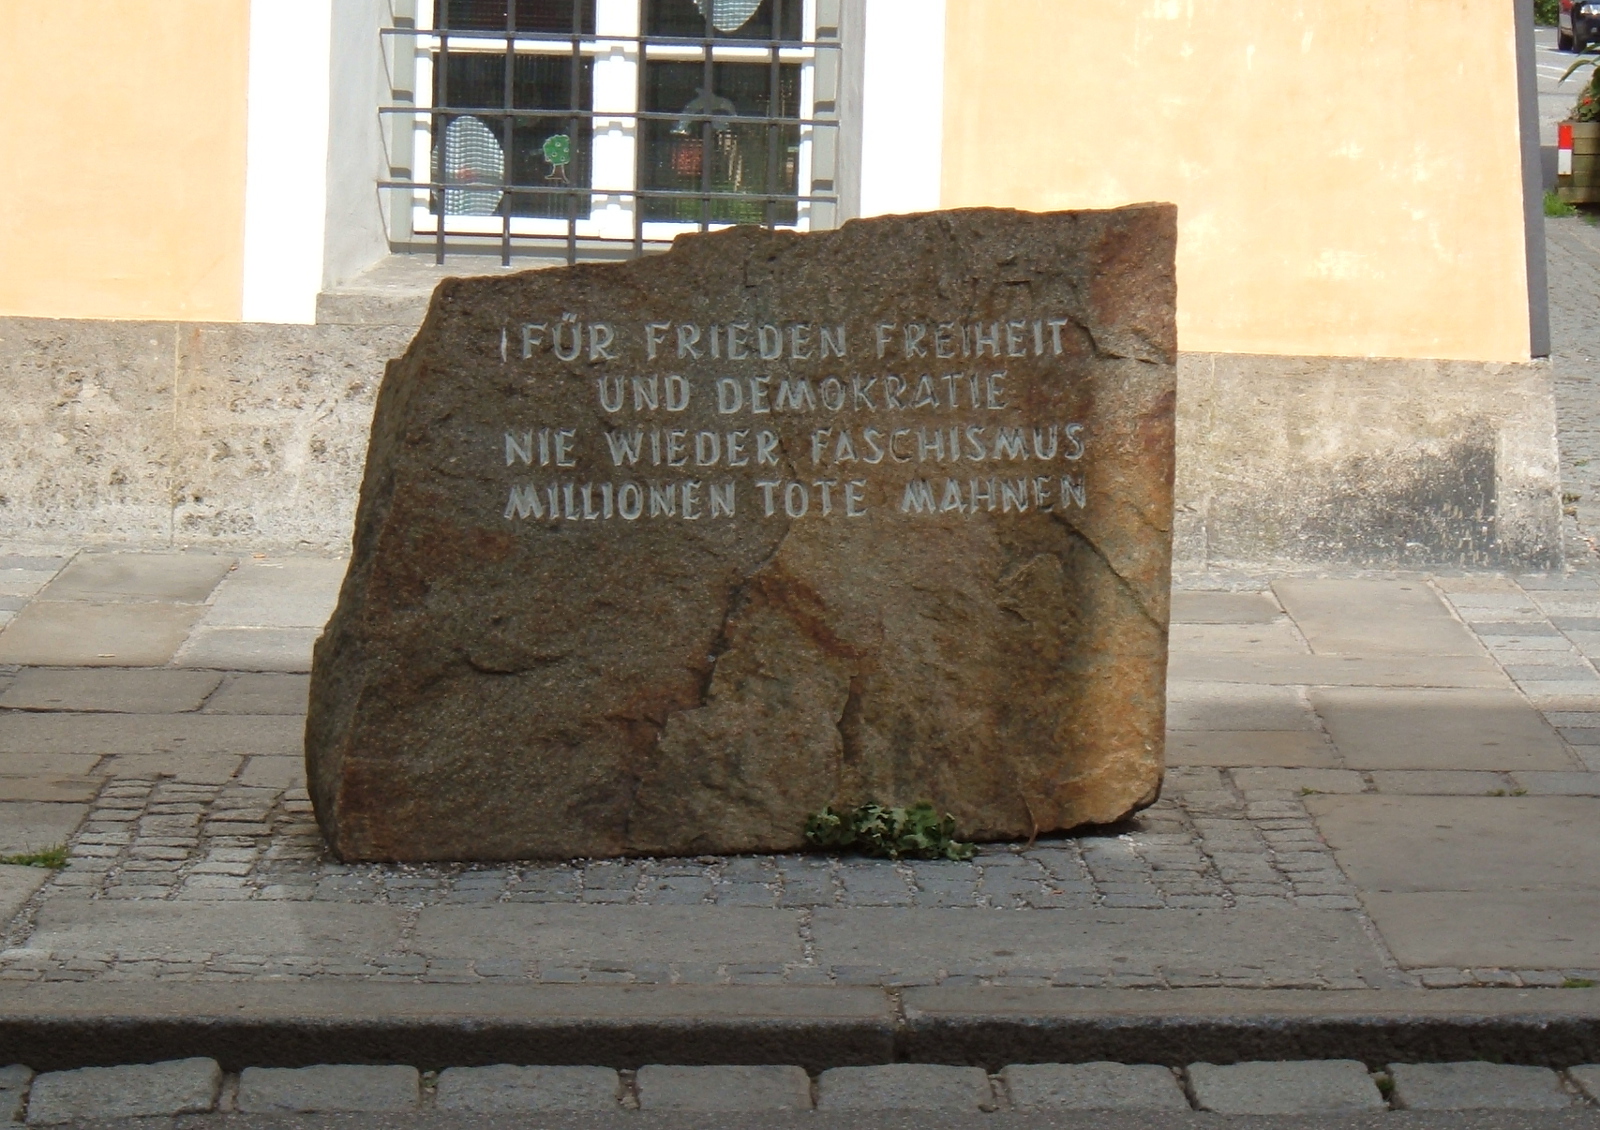 Monument in front of Hitler’s birthplace: “For peace, freedom, and democracy, never again fascism, millions of dead implore.”